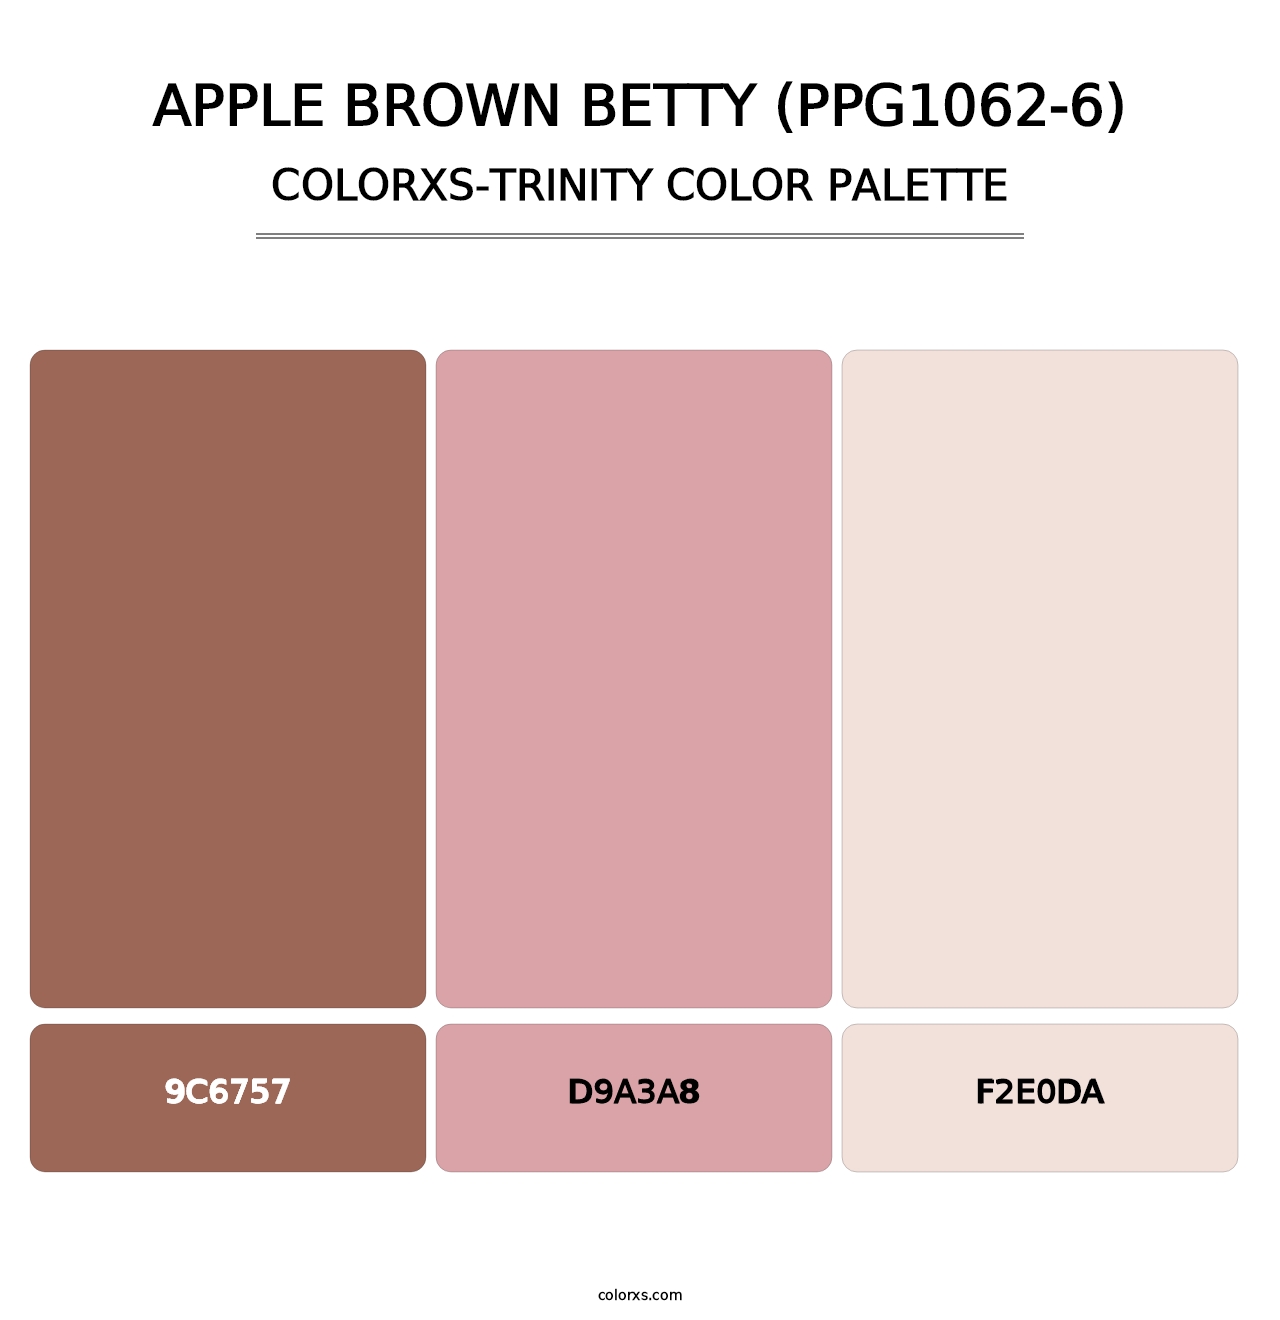 Apple Brown Betty (PPG1062-6) - Colorxs Trinity Palette